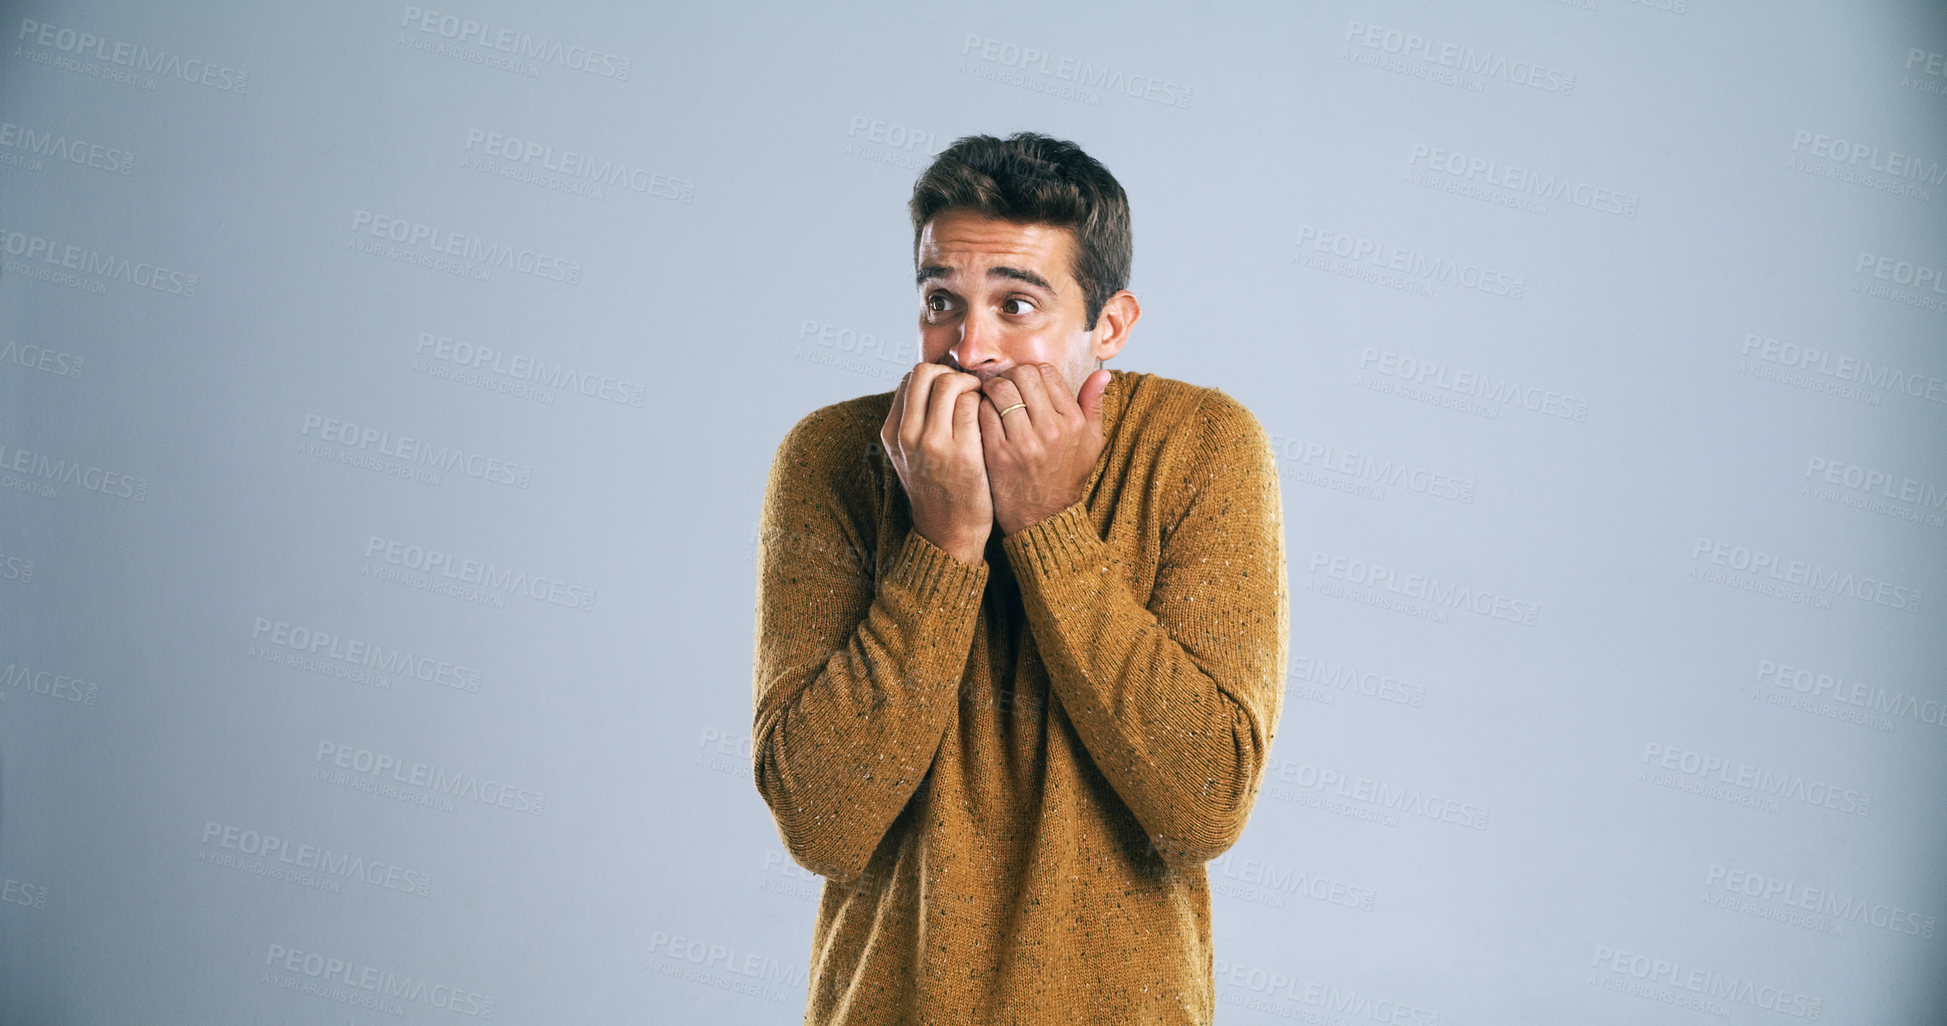 Buy stock photo Studio shot of a handsome young man looking scared against a gray background